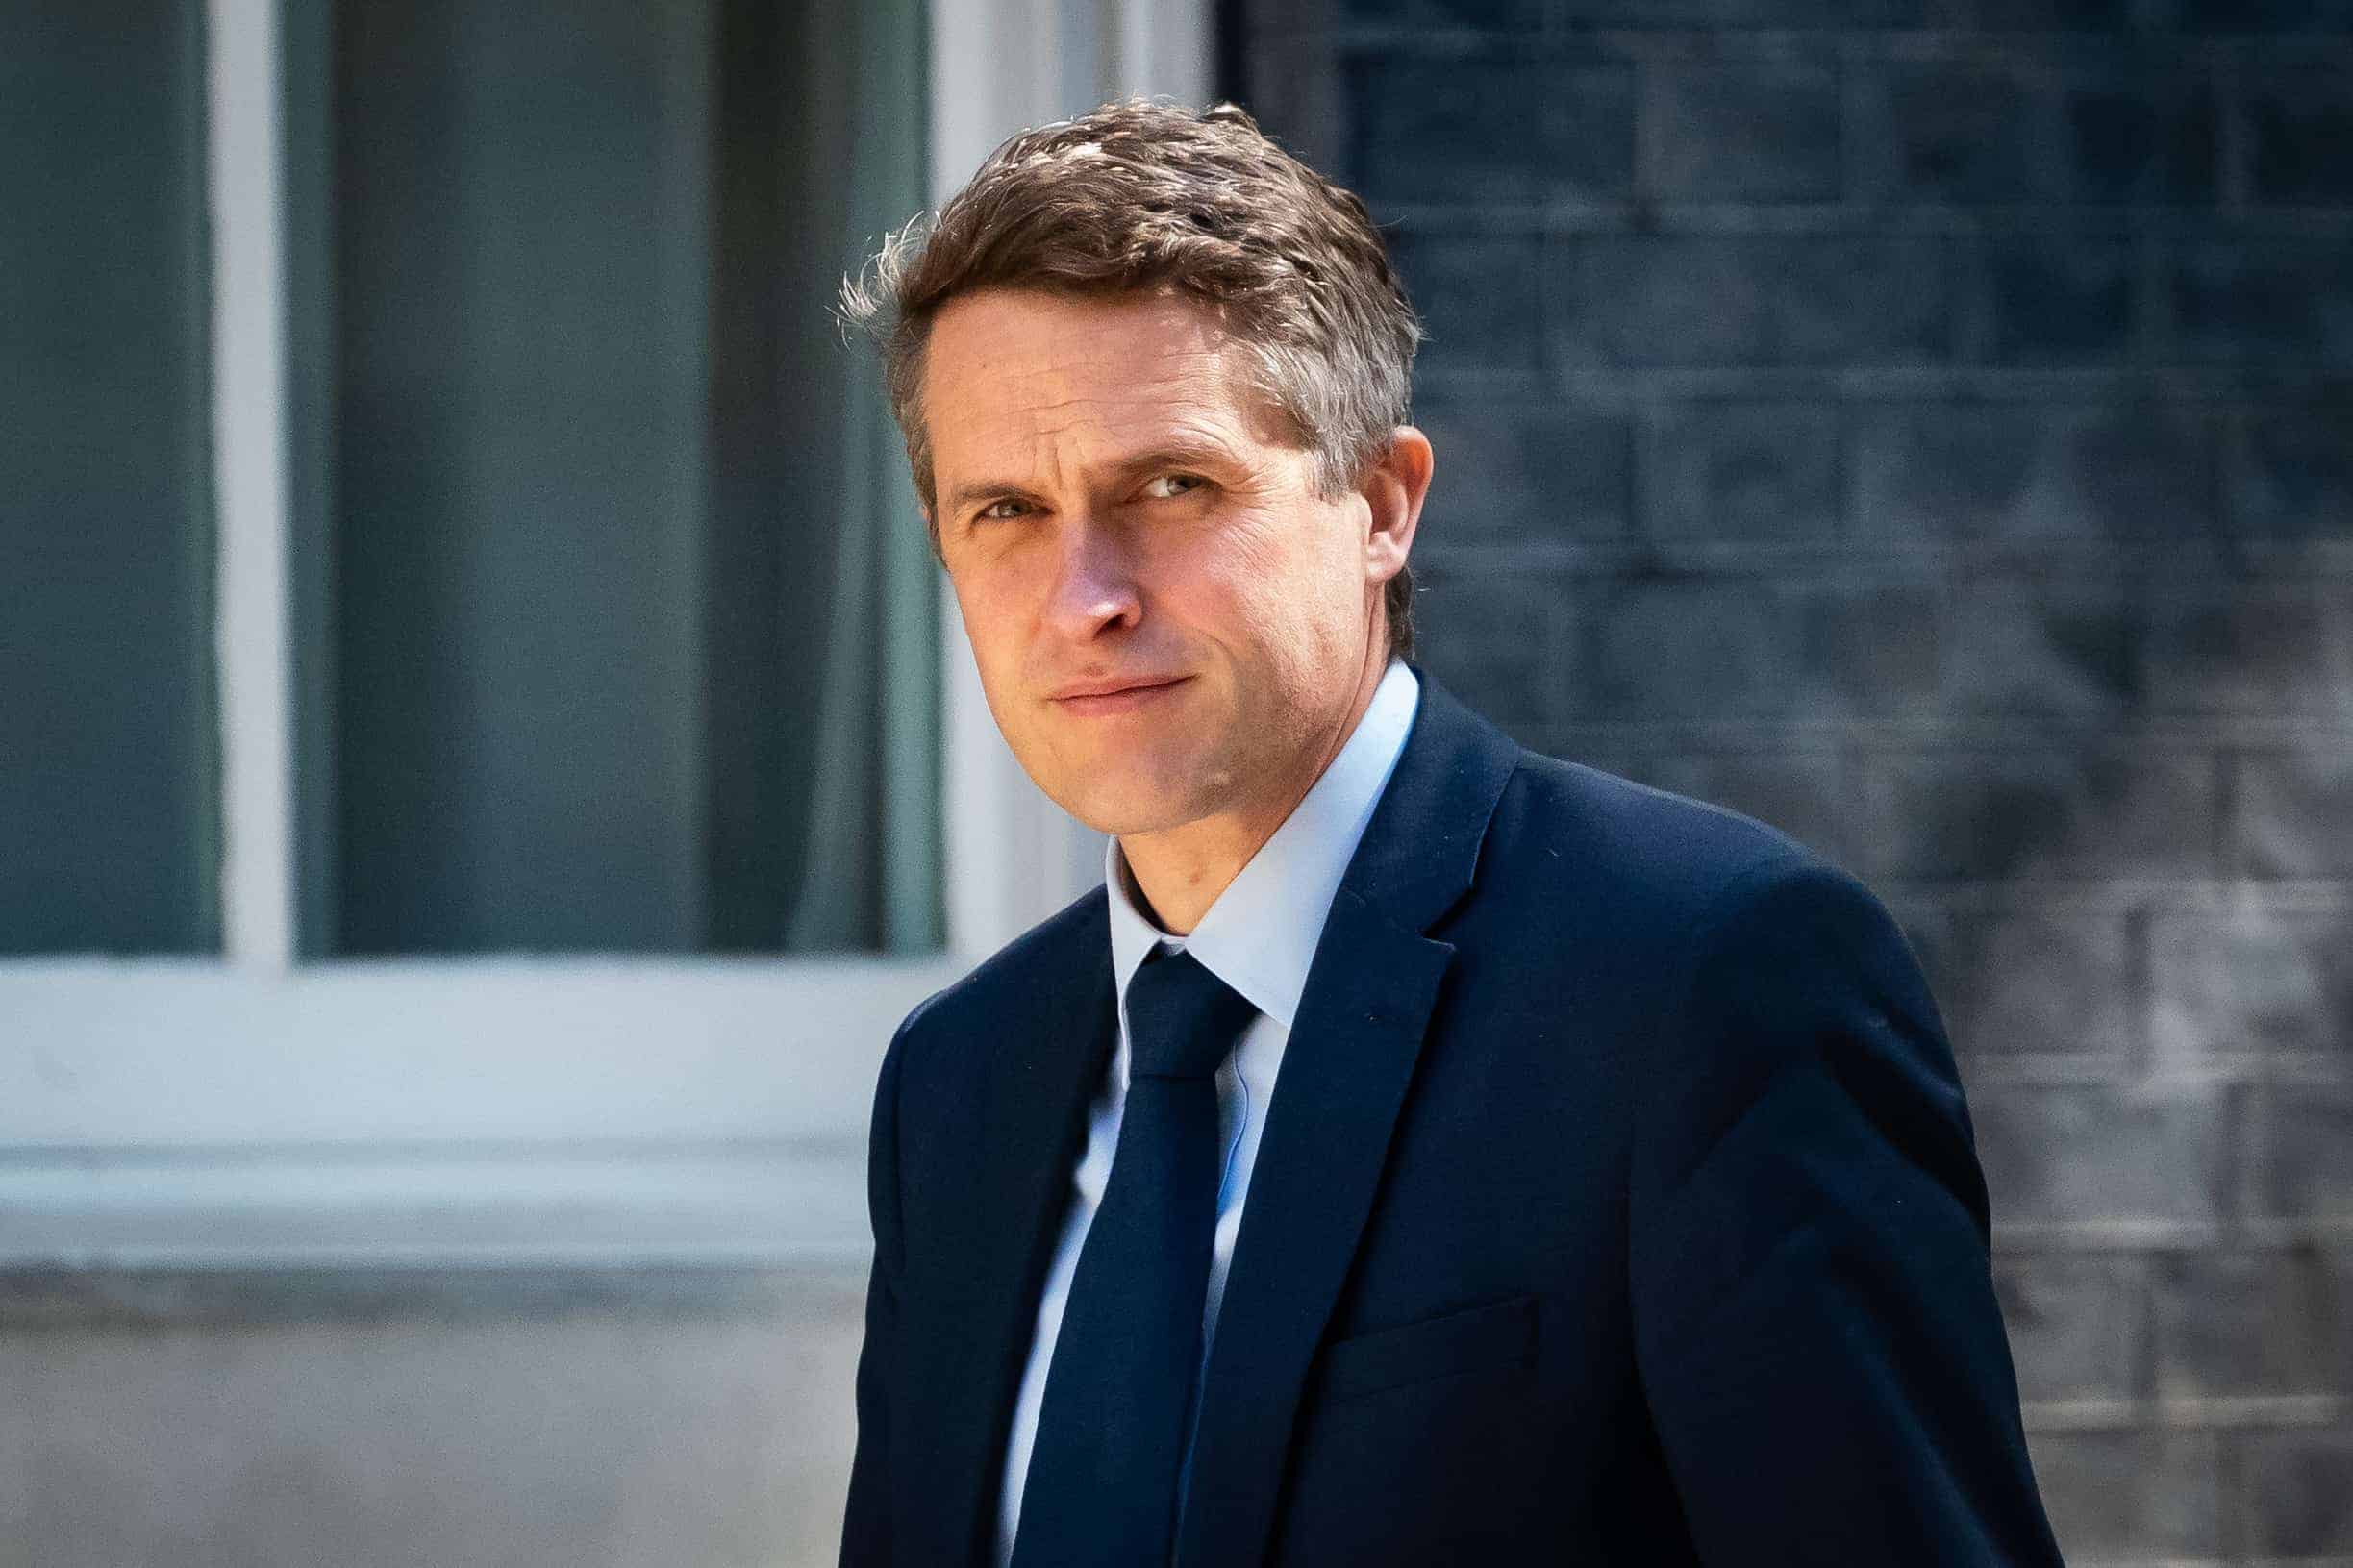 Government ‘asleep at the wheel’ over plans to reopen schools, says Labour